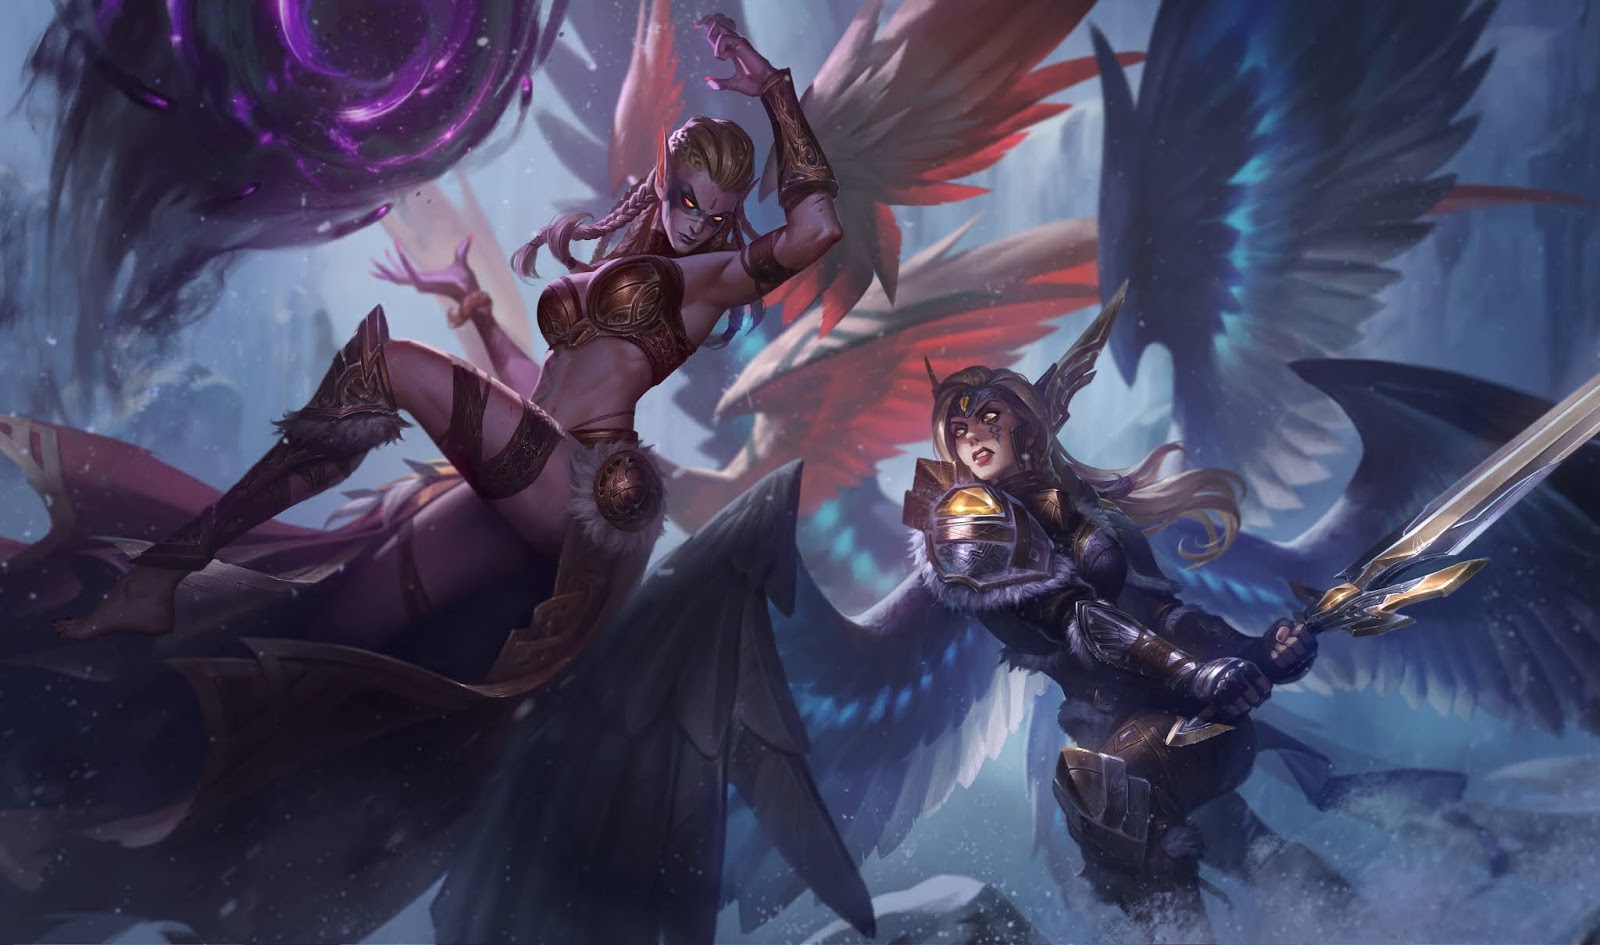 HD wallpaper Video Game League Of Legends Kayle League Of Legends  Morgana League Of Legends  Wallpaper Flare